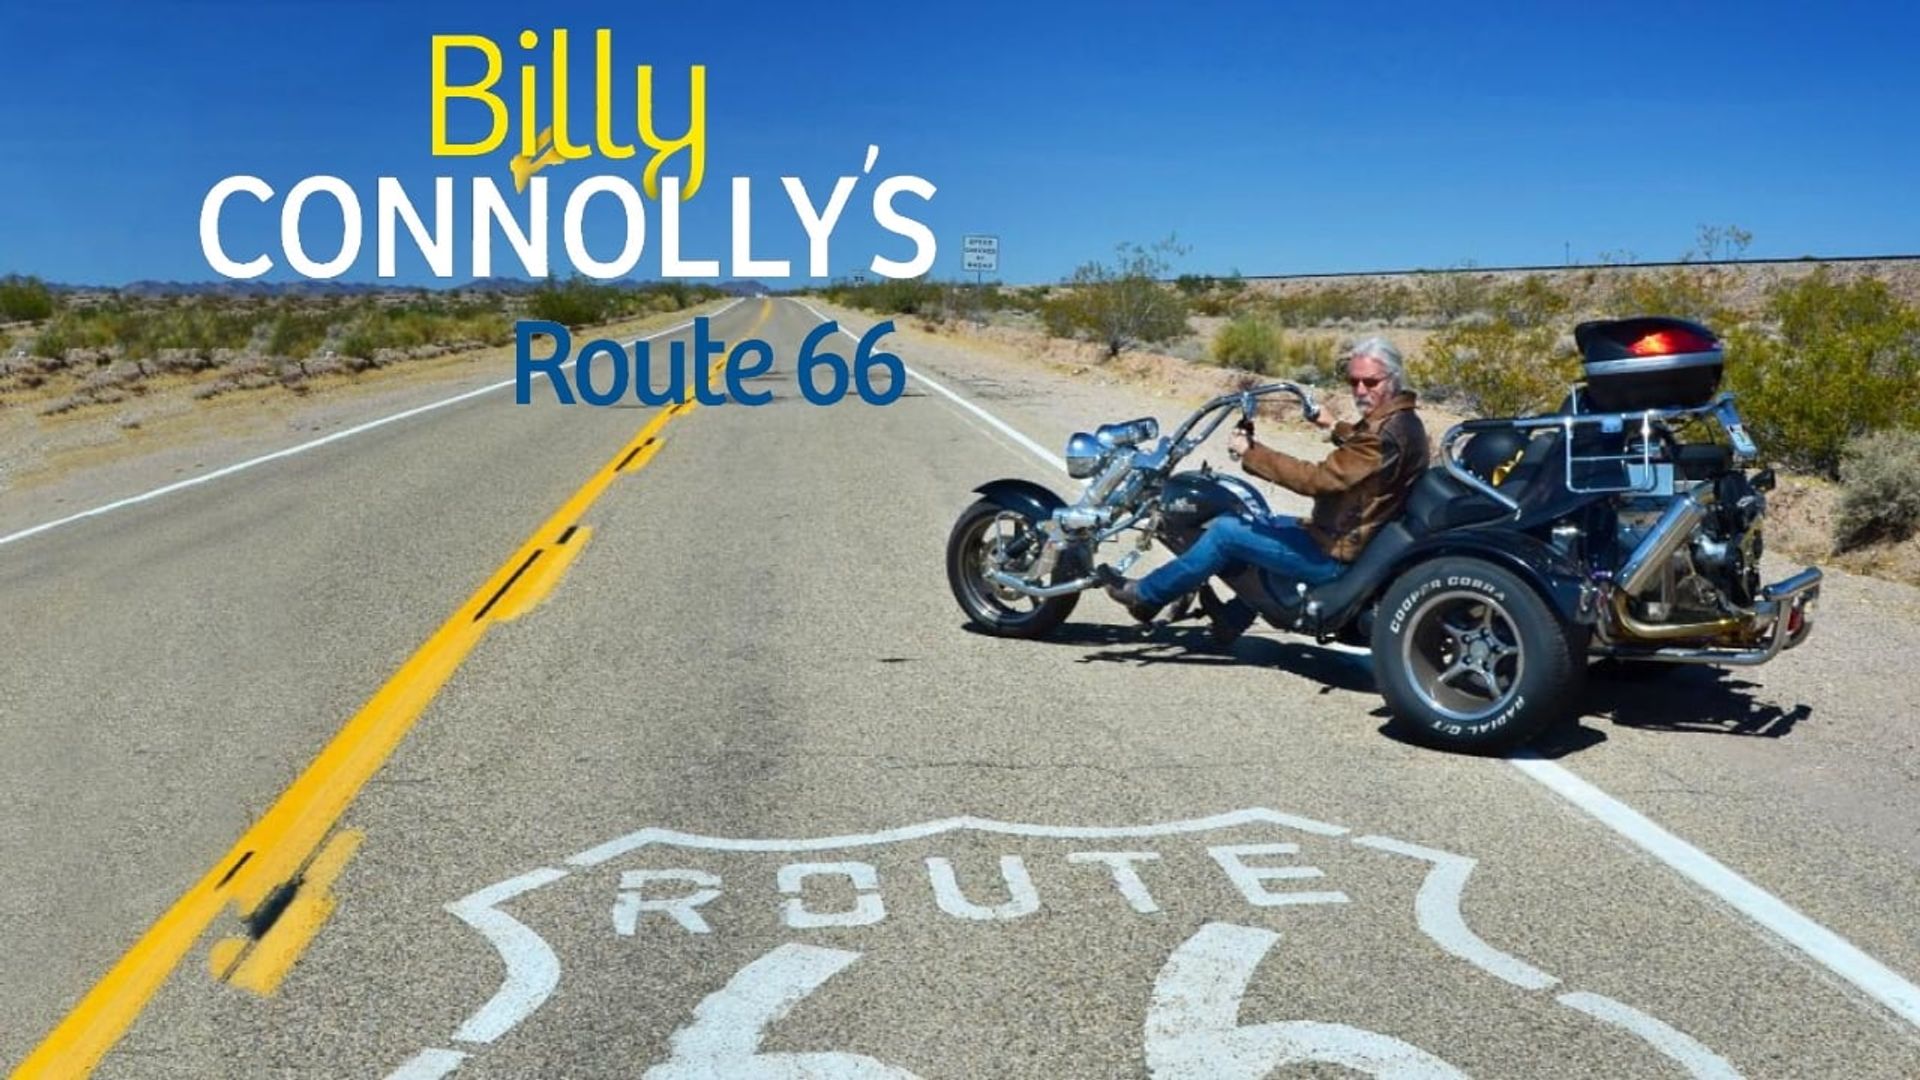 Billy Connolly's Route 66 background